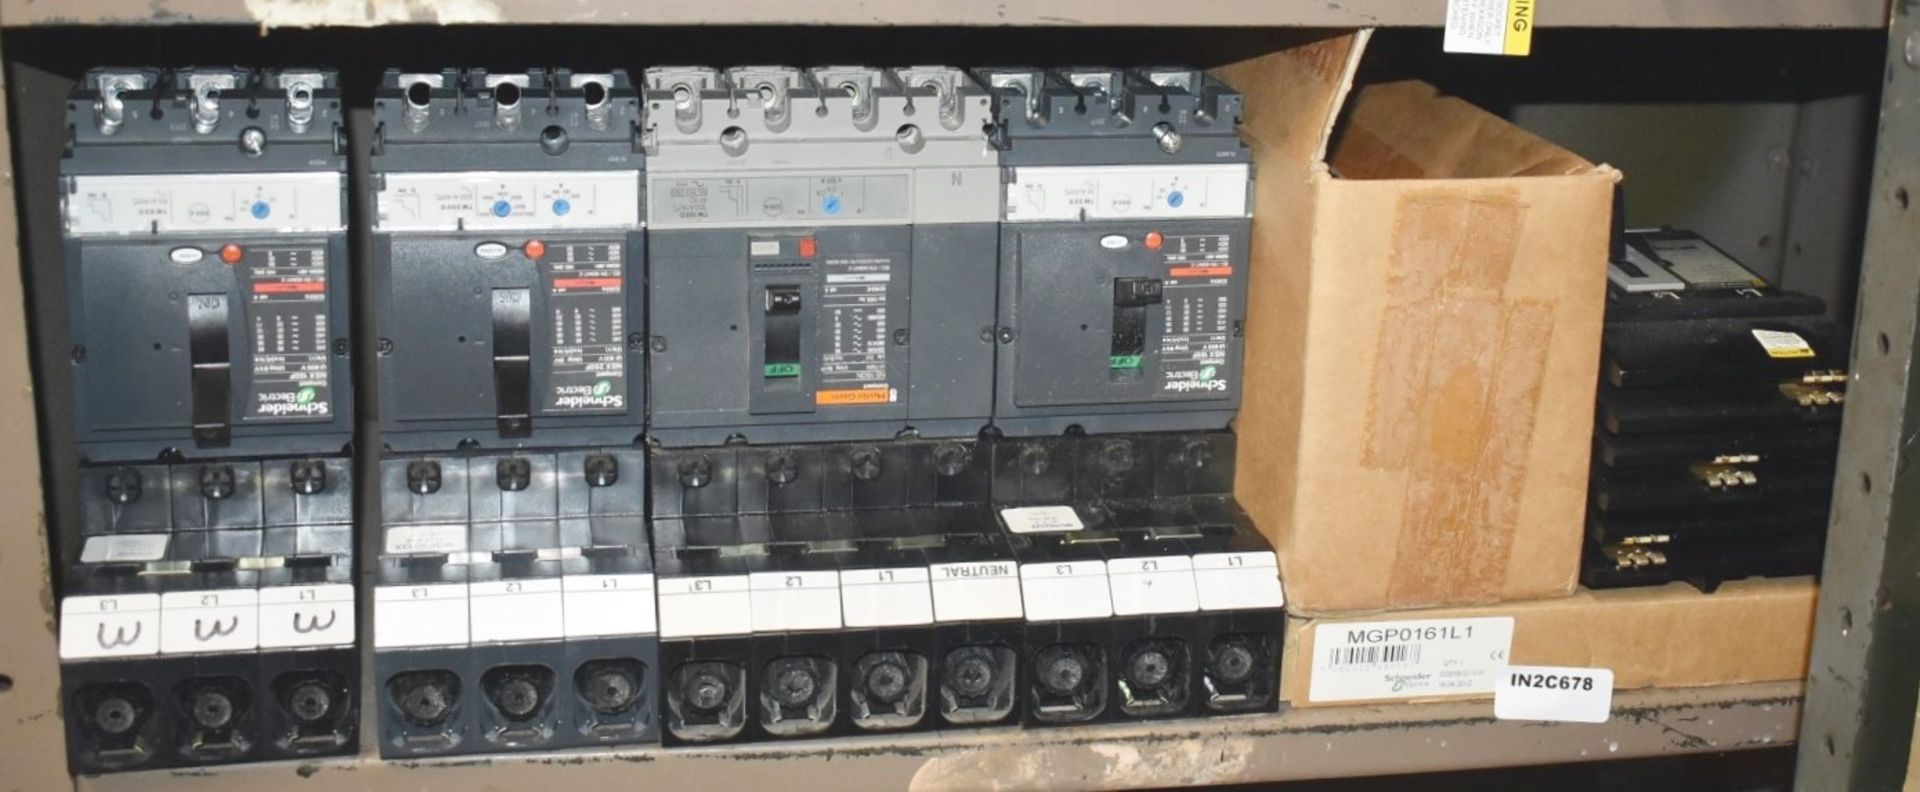 Assorted Electrical Components - Contents of Shelf - Ref: C678 - CL816 - Location: Birmingham, B45<p